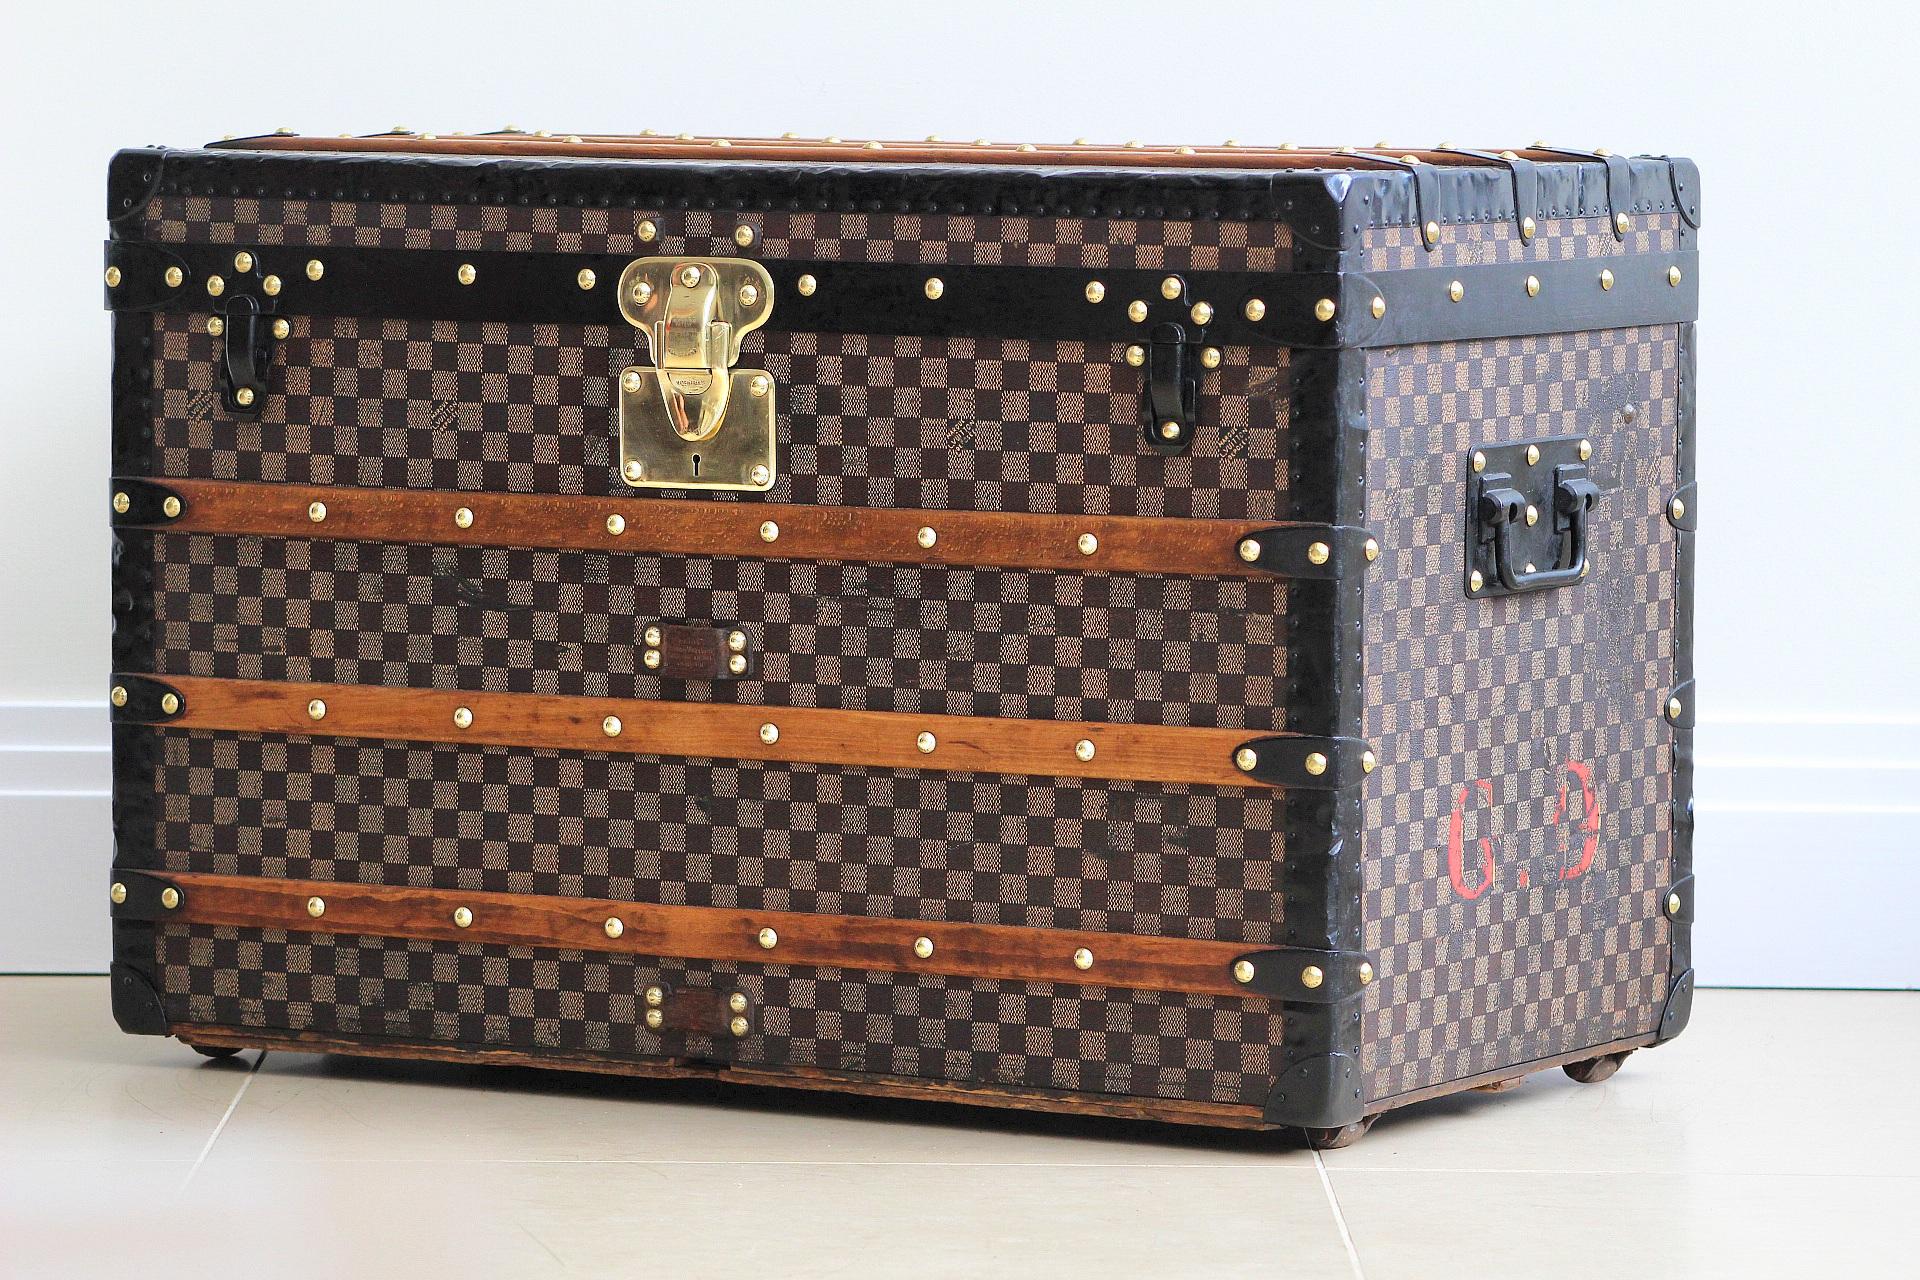 Discover the epitome of timeless luxury with this exquisite Louis Vuitton Courier Trunk, a rare gem from the 1880s that embodies the heritage and exquisite craftsmanship of the iconic brand. This exceptional piece is a tribute to the era of grand